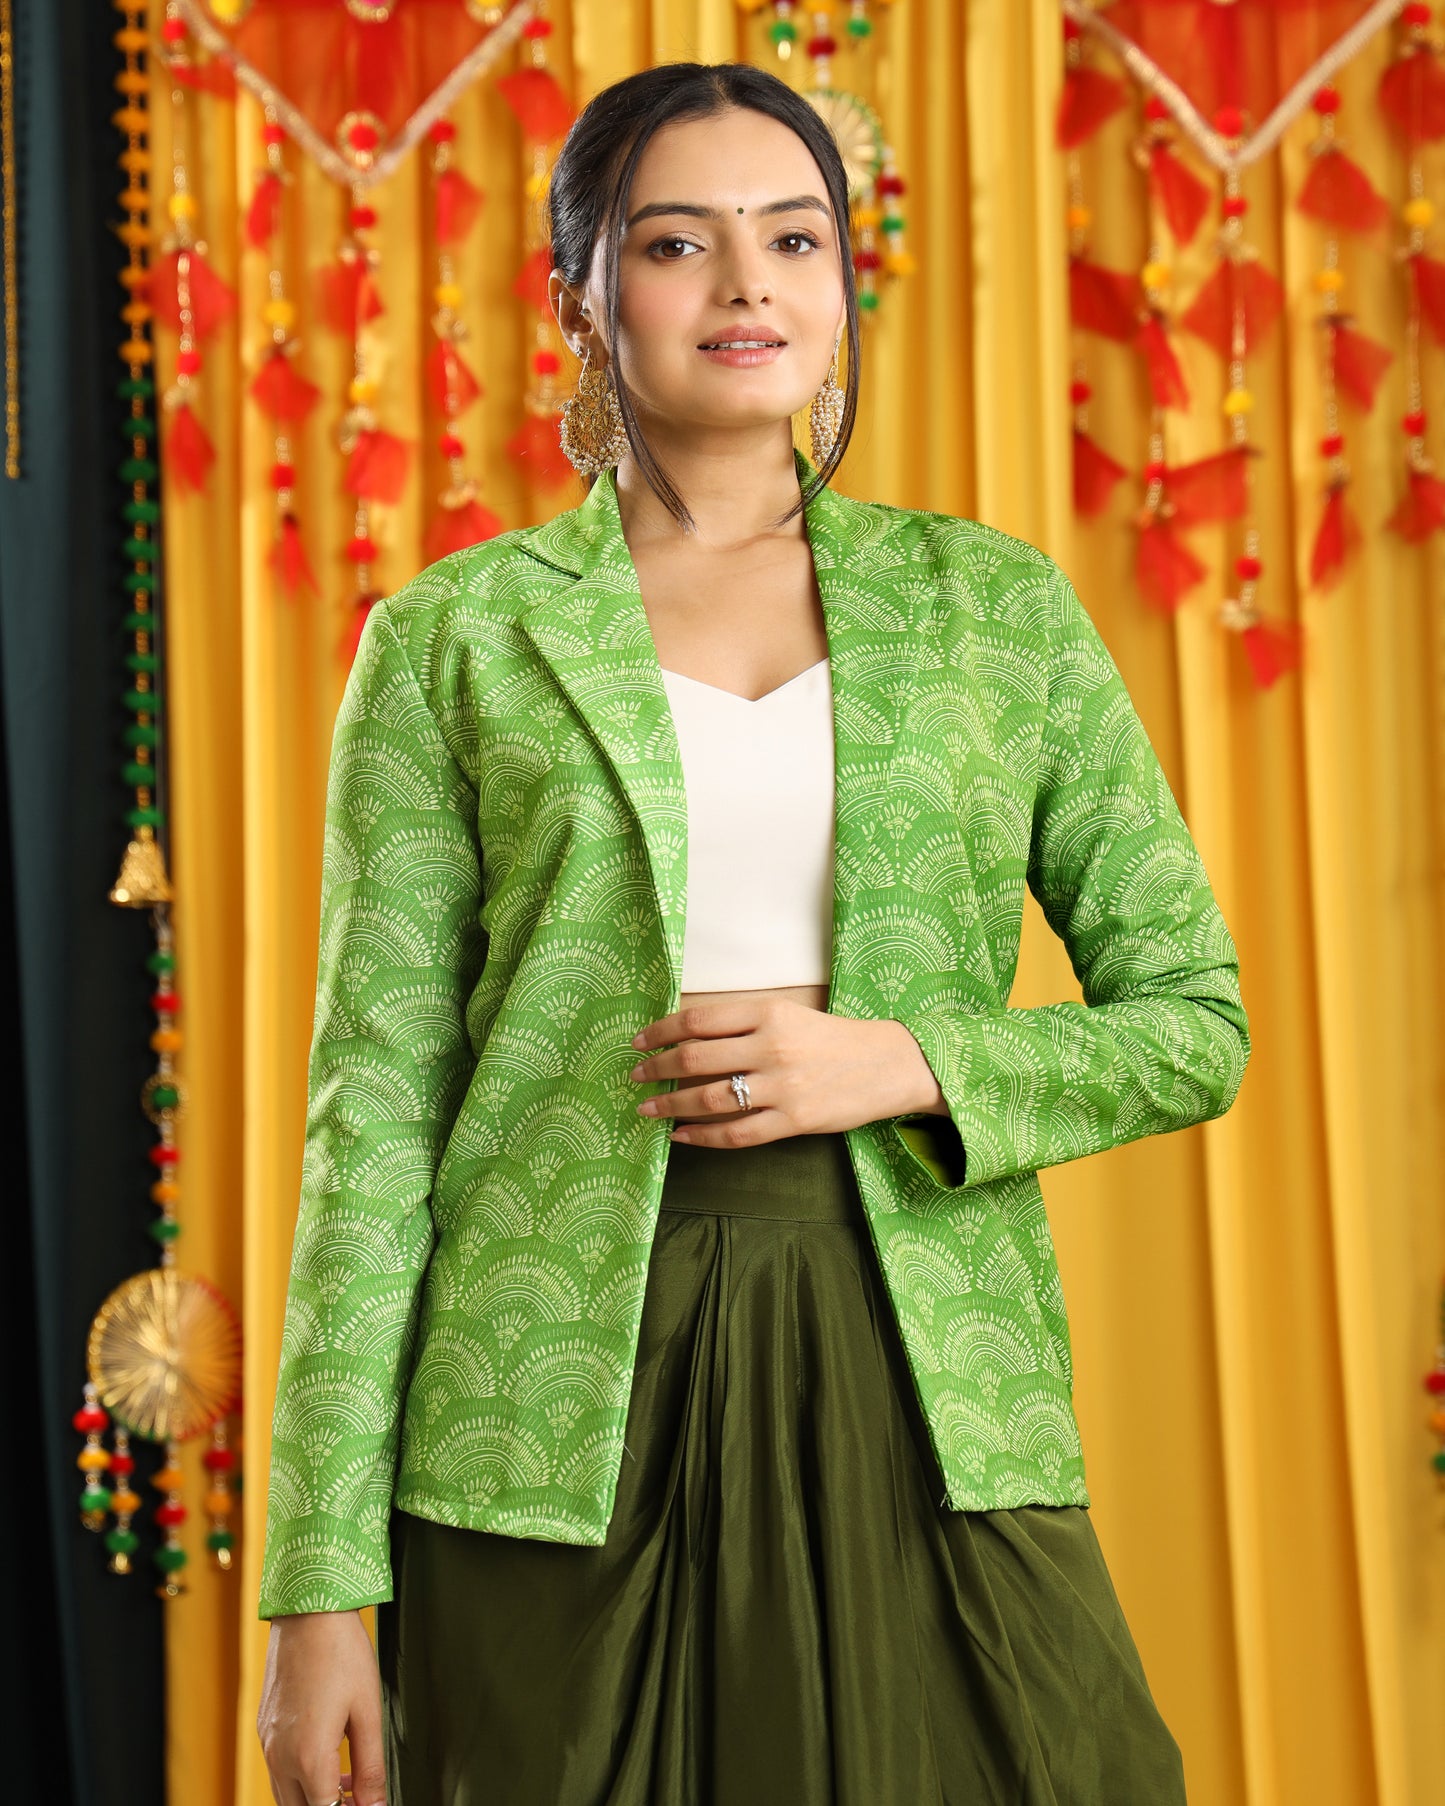 Say "I Do" in Style: The Luxurious Green Womens Jacket